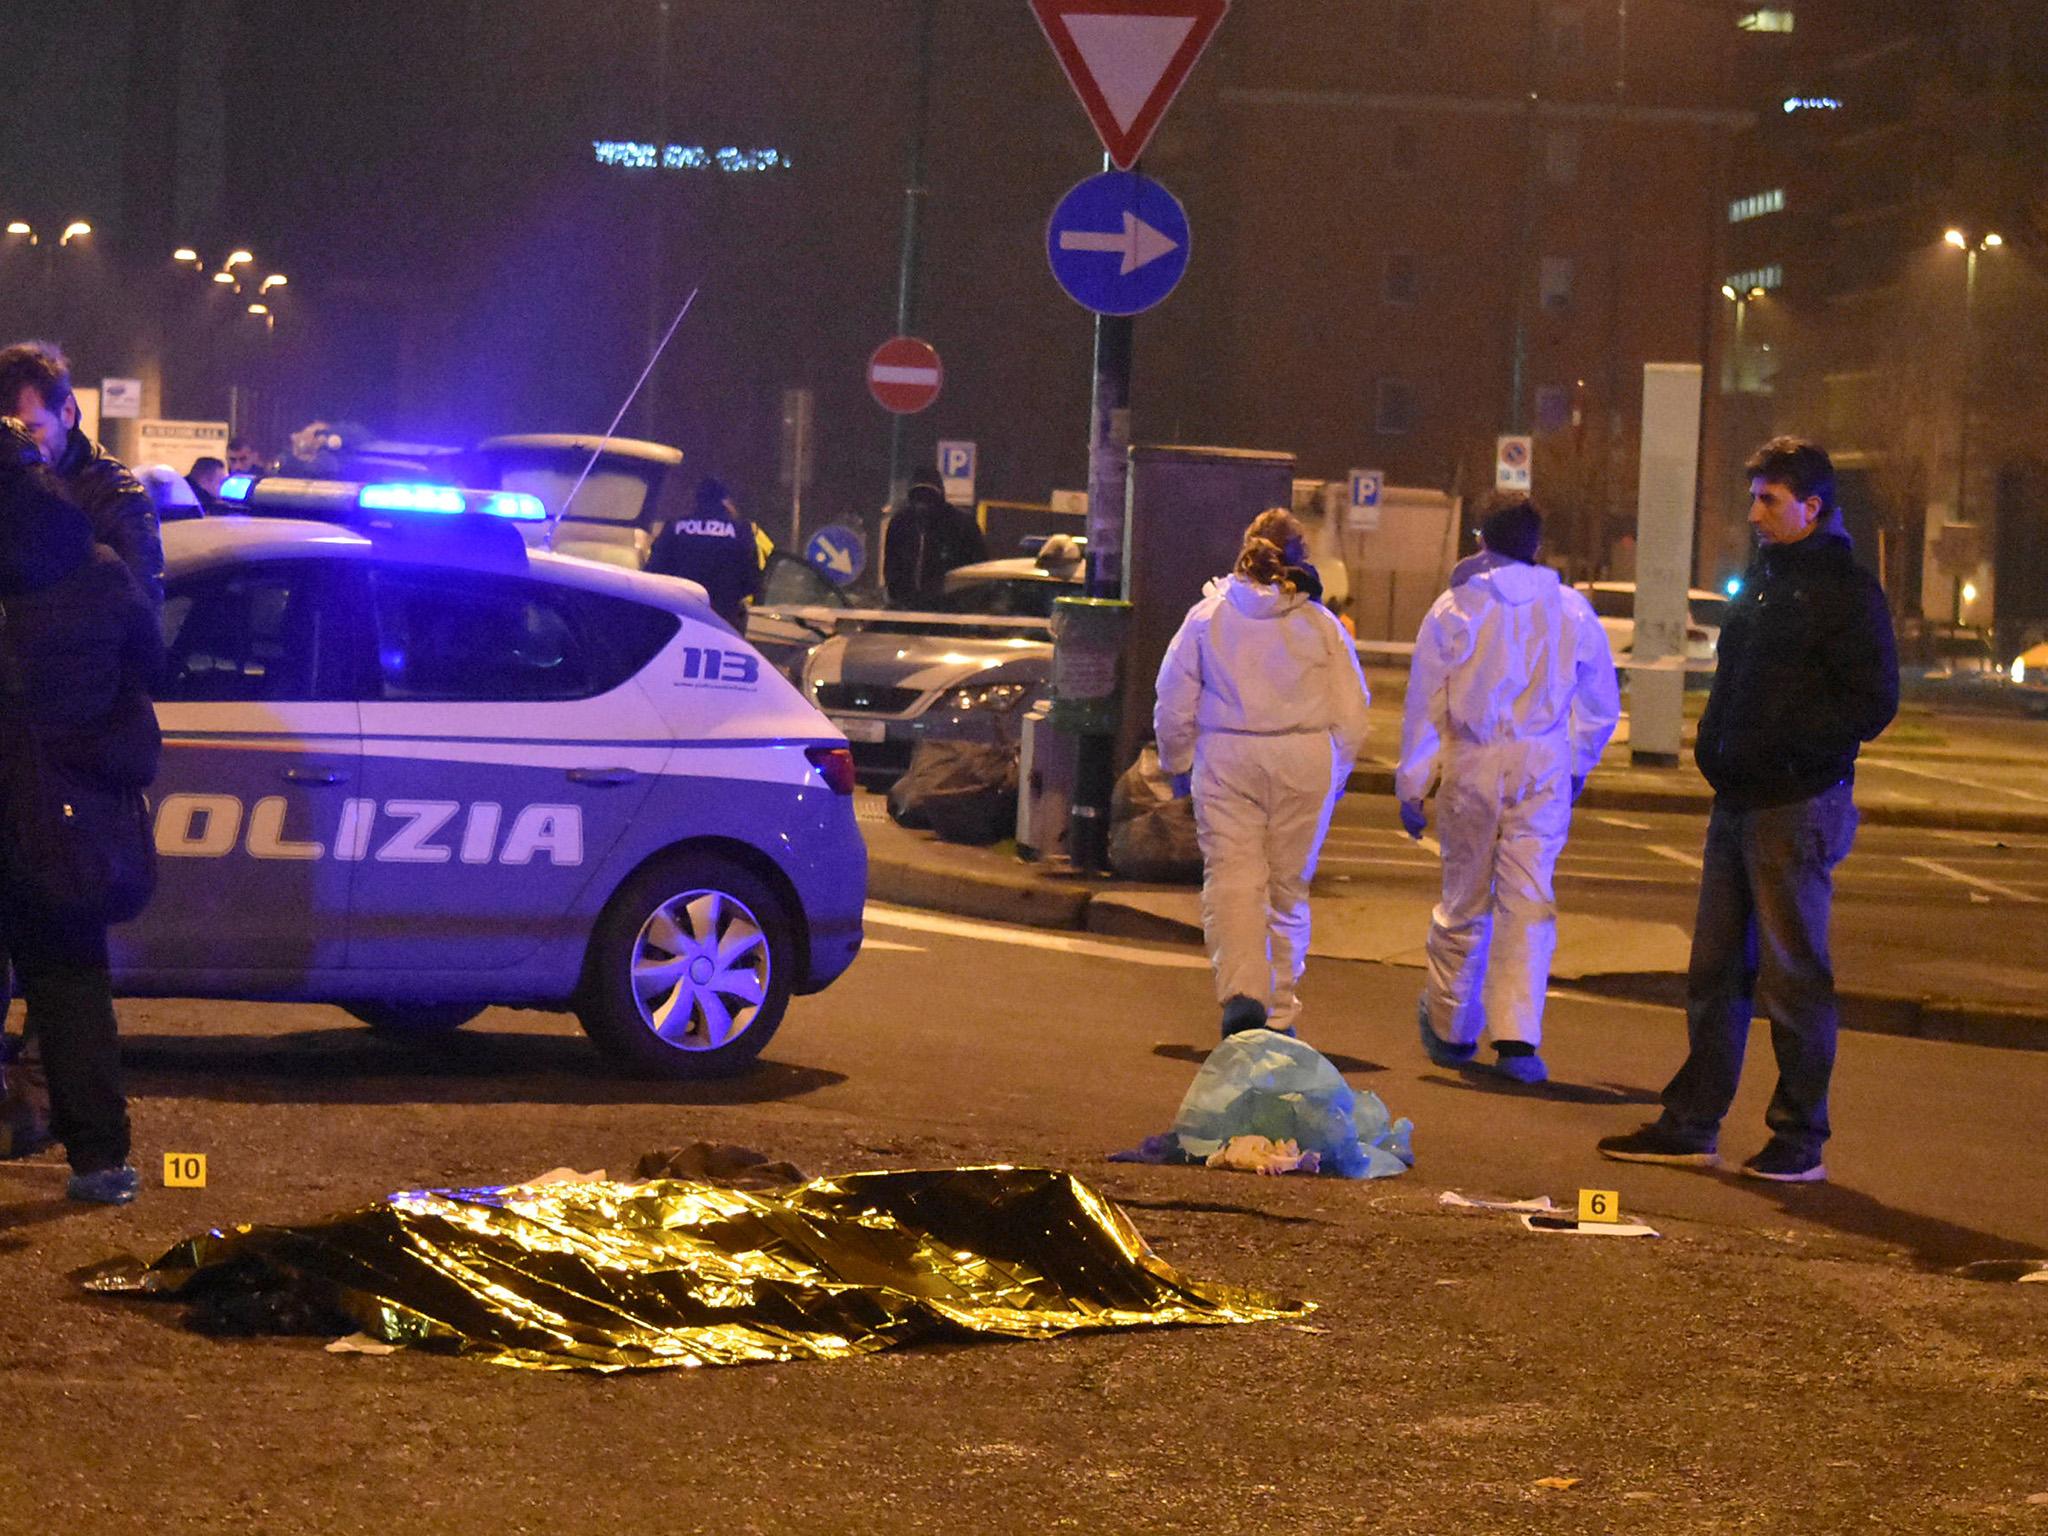 Italian police stands next to a covered body at the scene of a shootout between police and a man in Milan's Sesto San Giovanni neighbourhood, early 23 December 2016